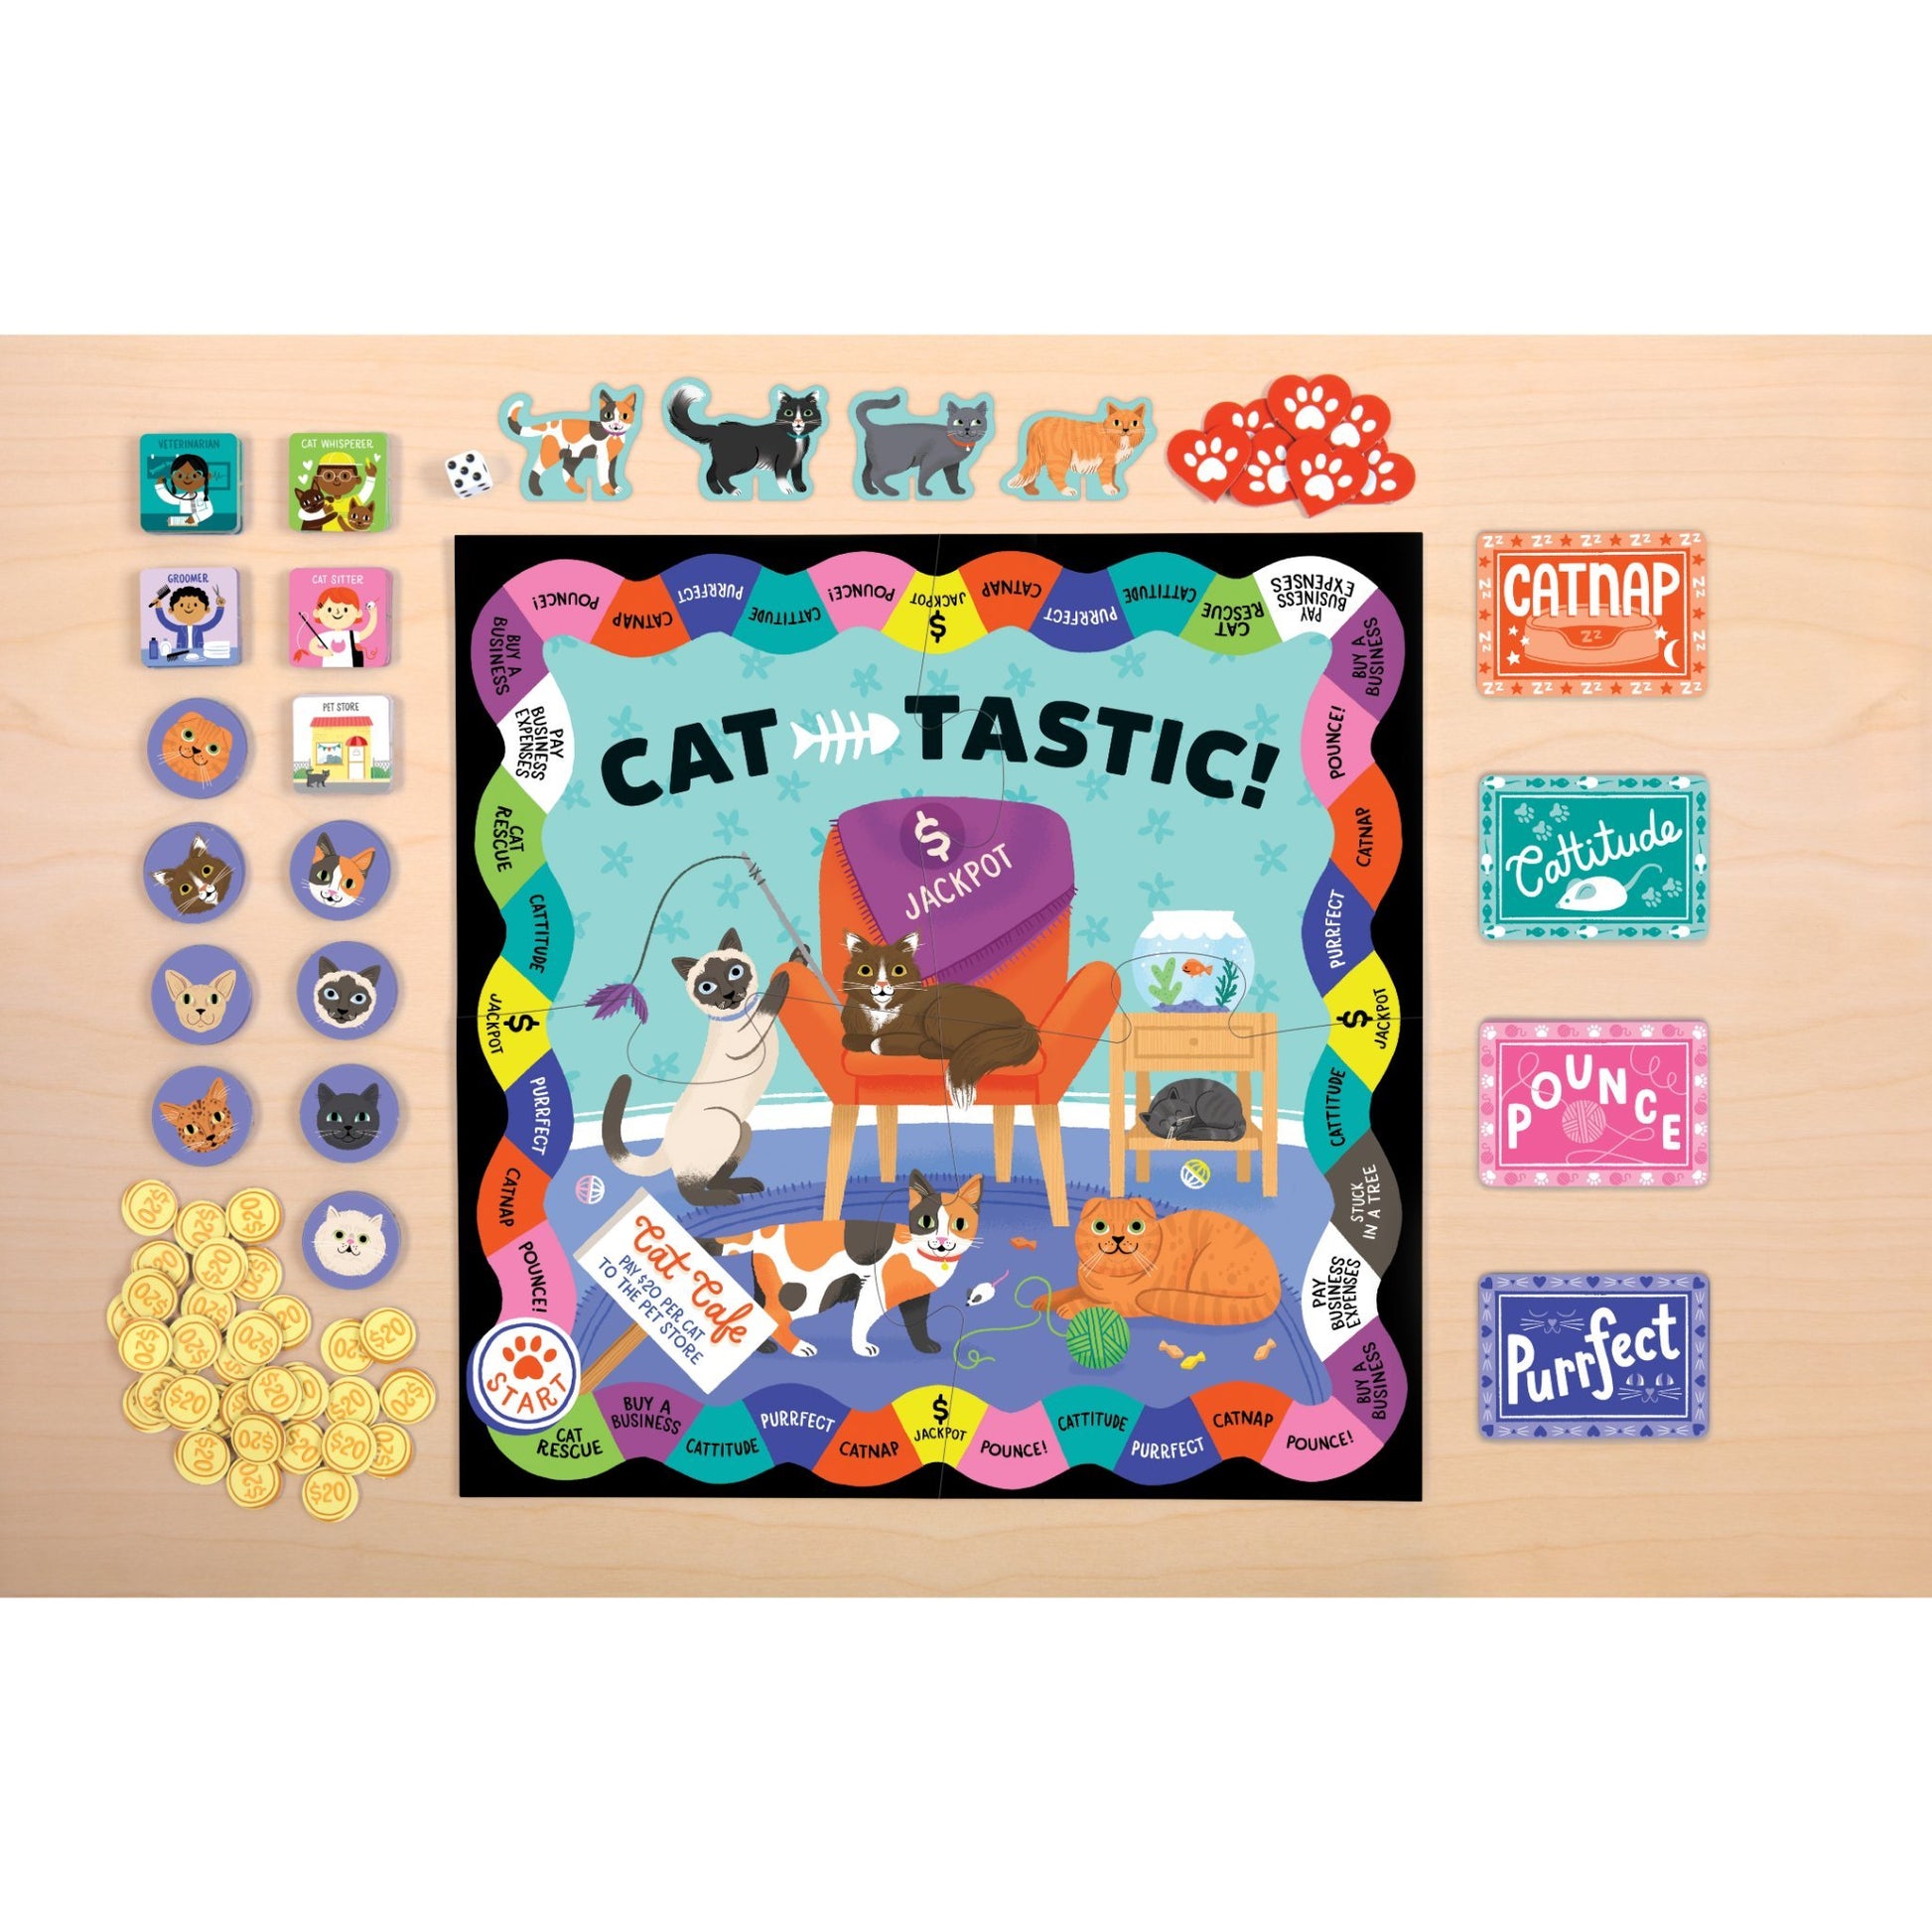 The Cat, Board Game